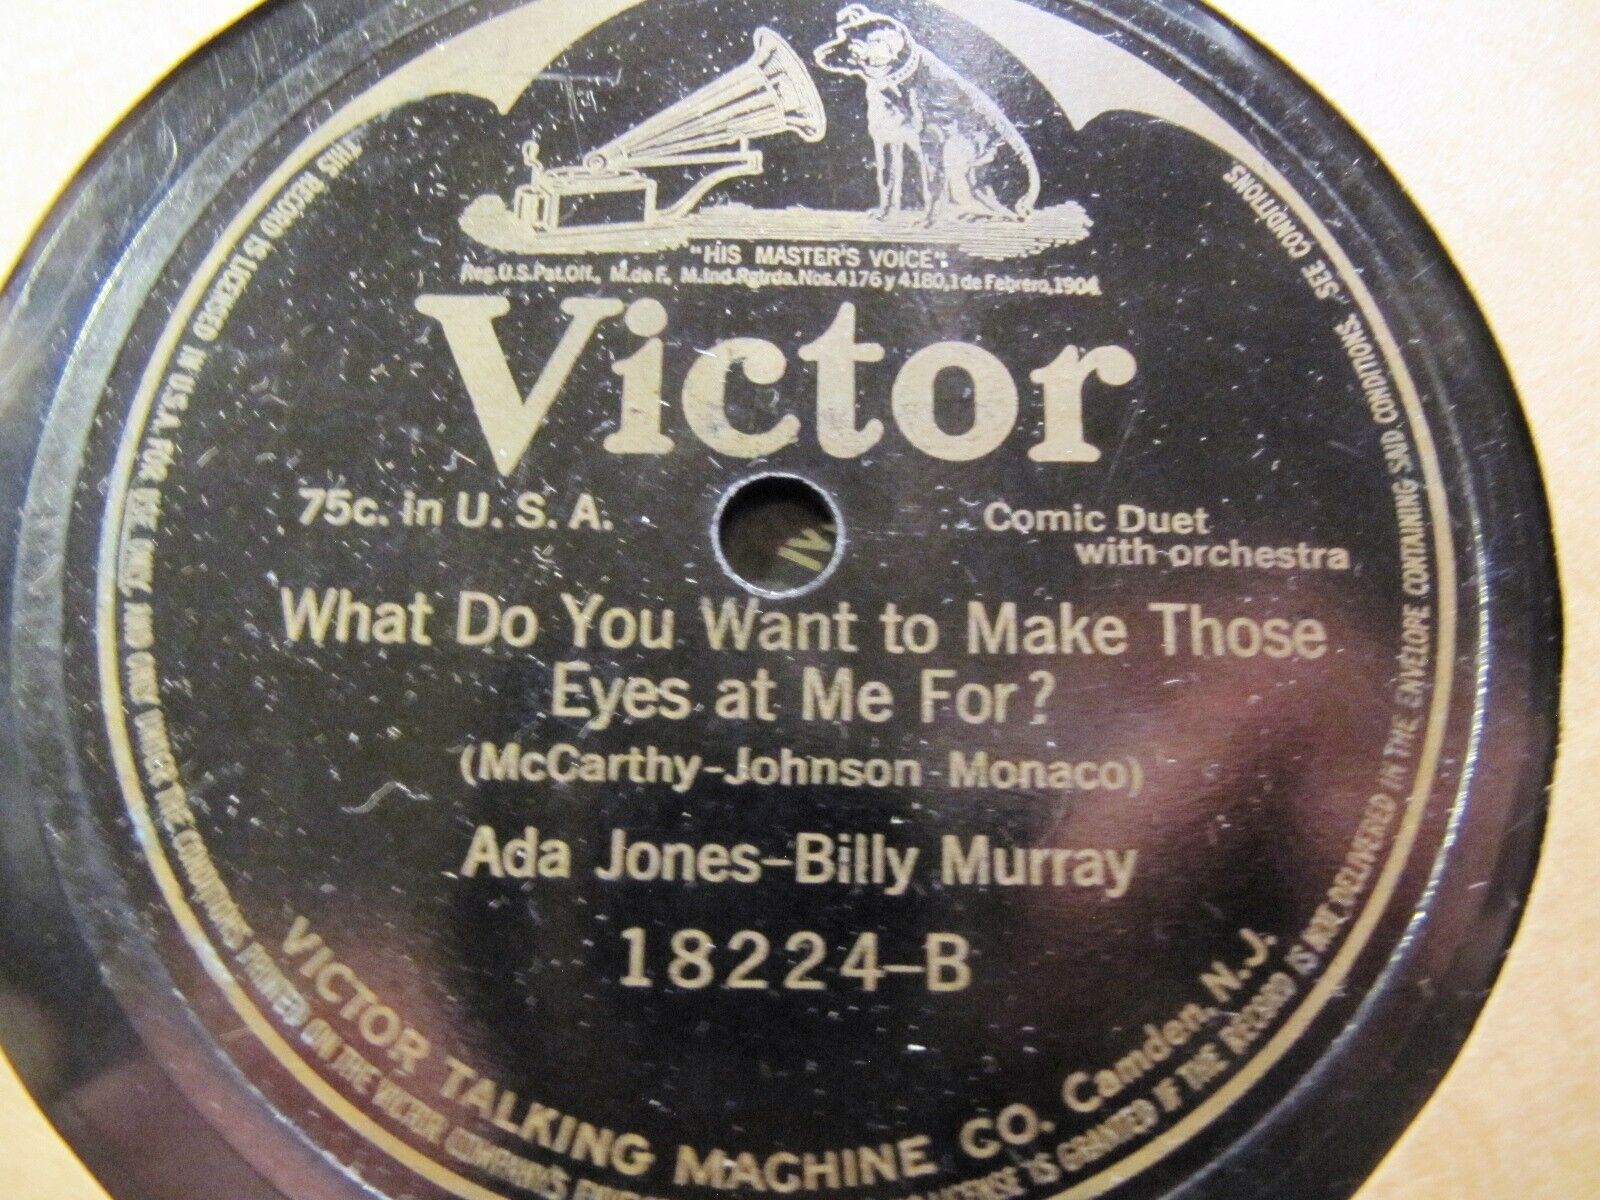 1917 Ada JONES Billy MURRAY What do you want to make those eyes at me for 18224